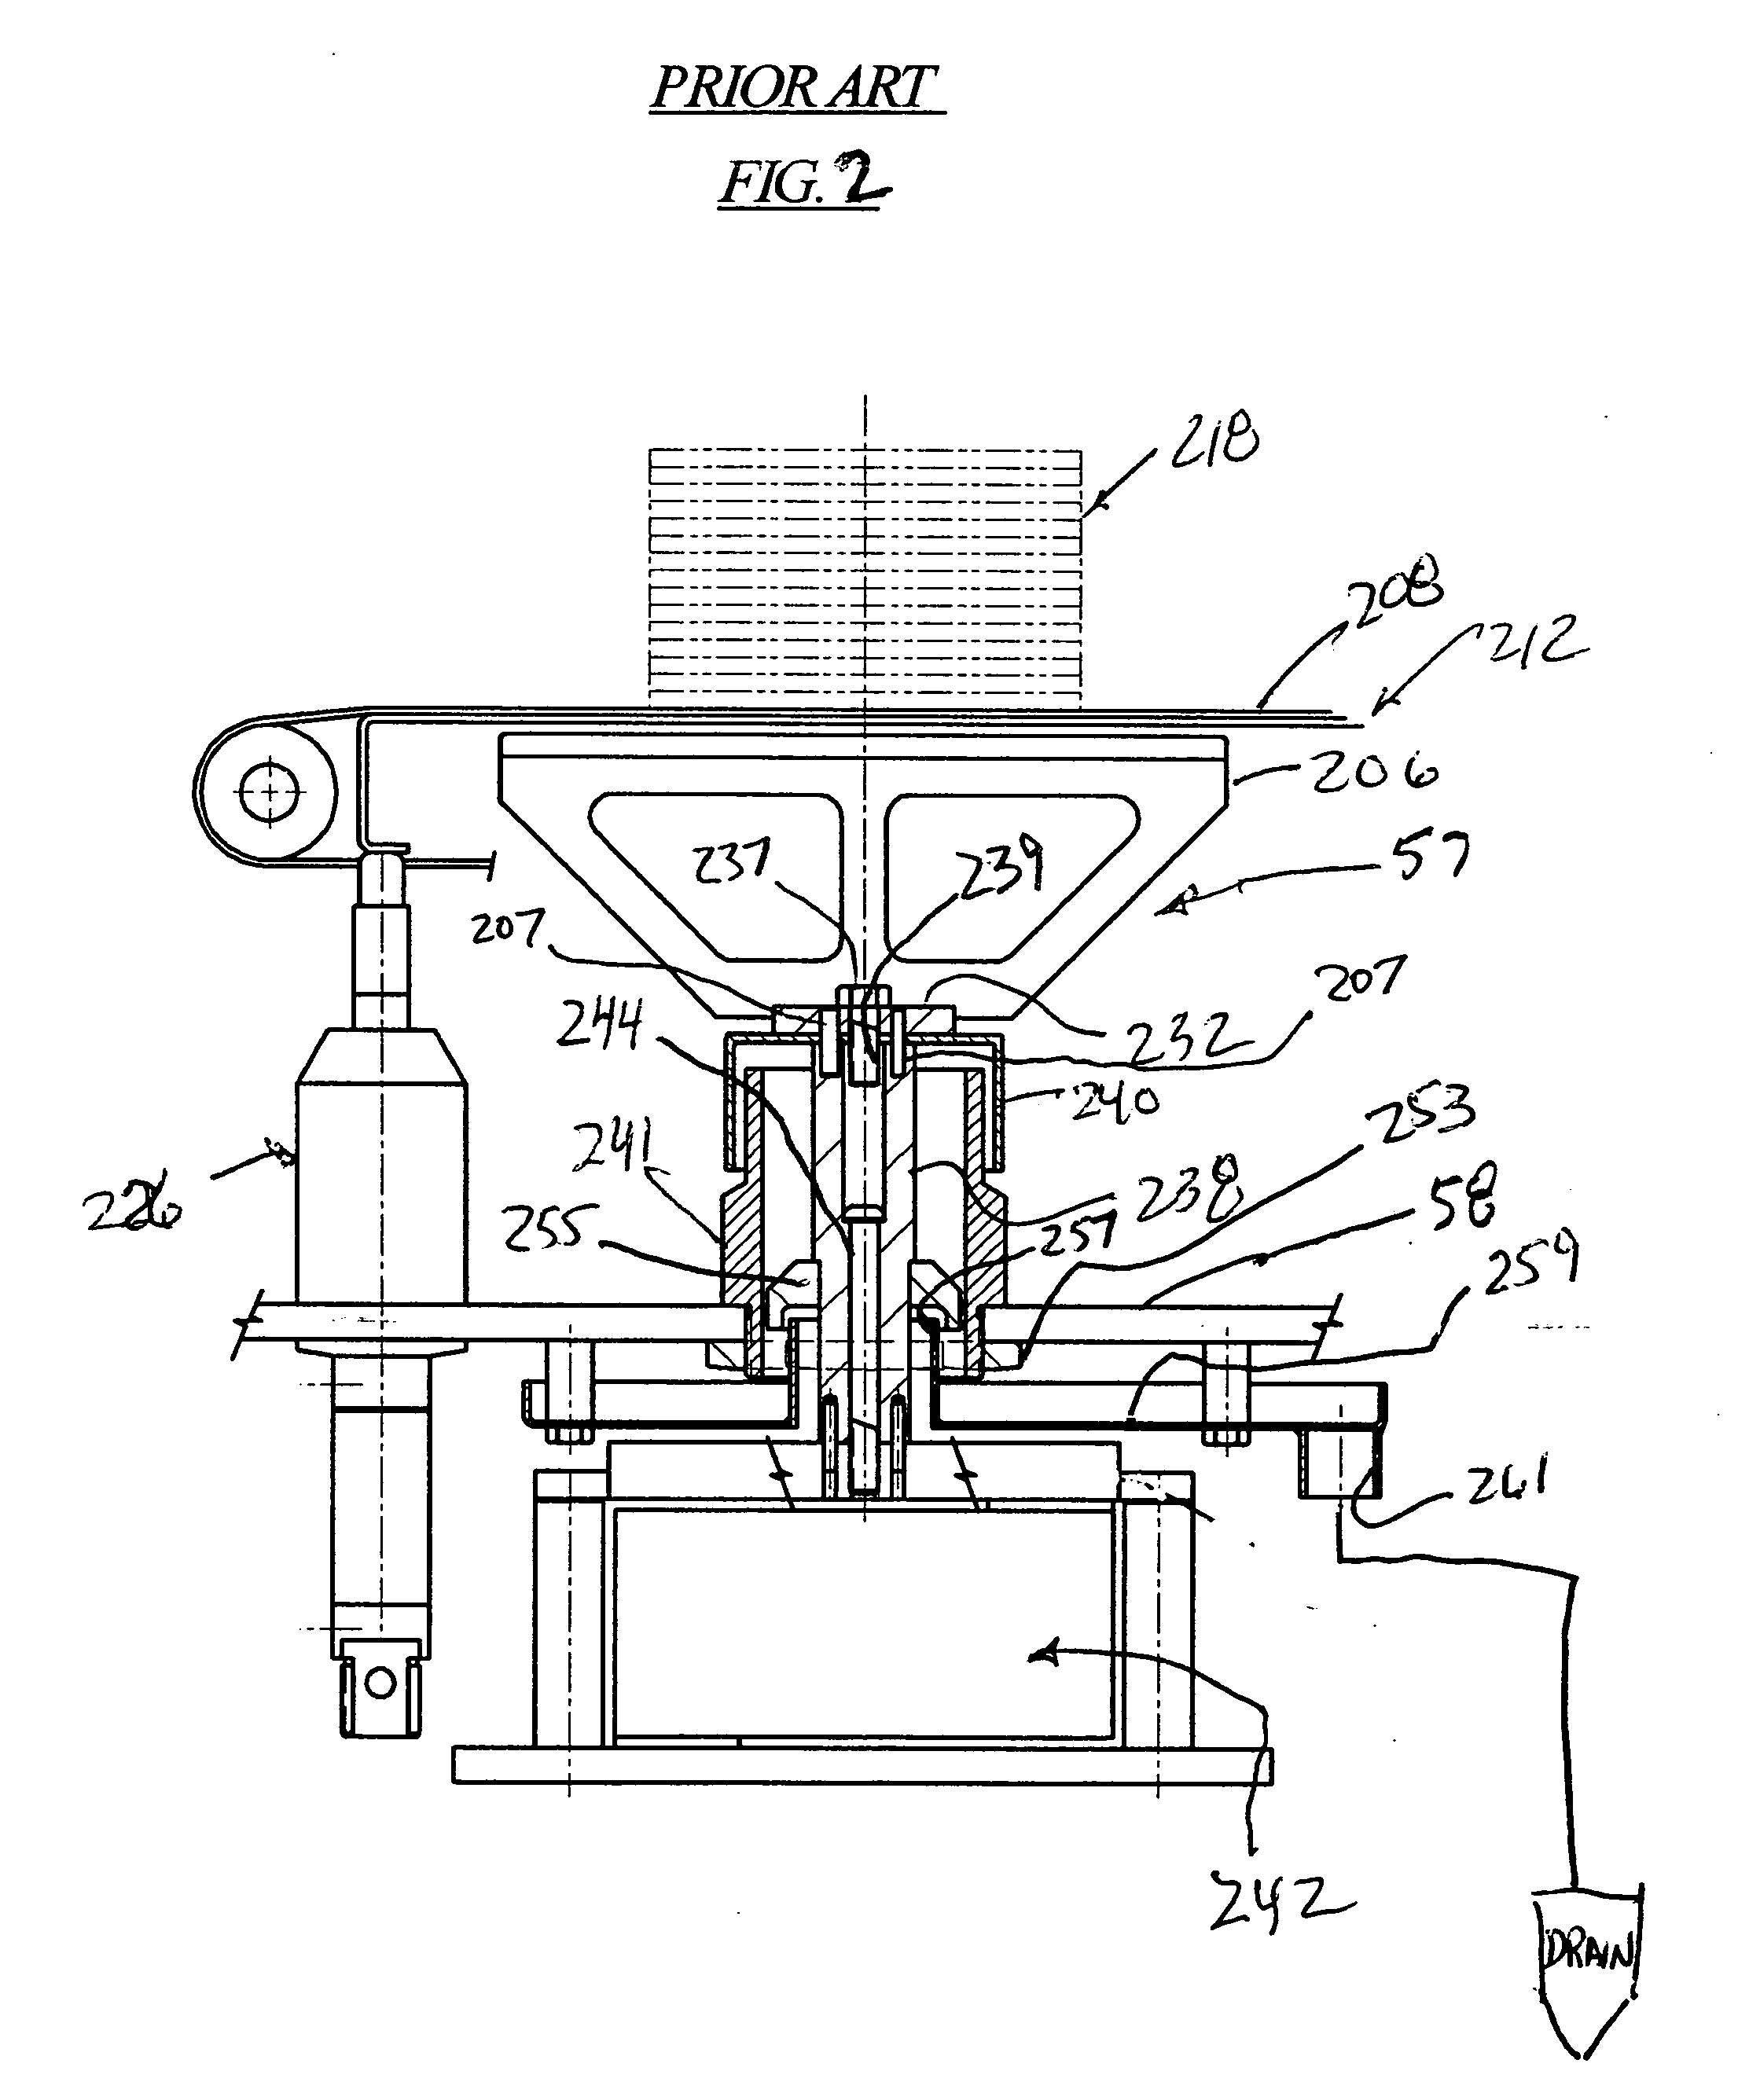 Automatic sealing arrangement for weigh scale for food processing apparatus